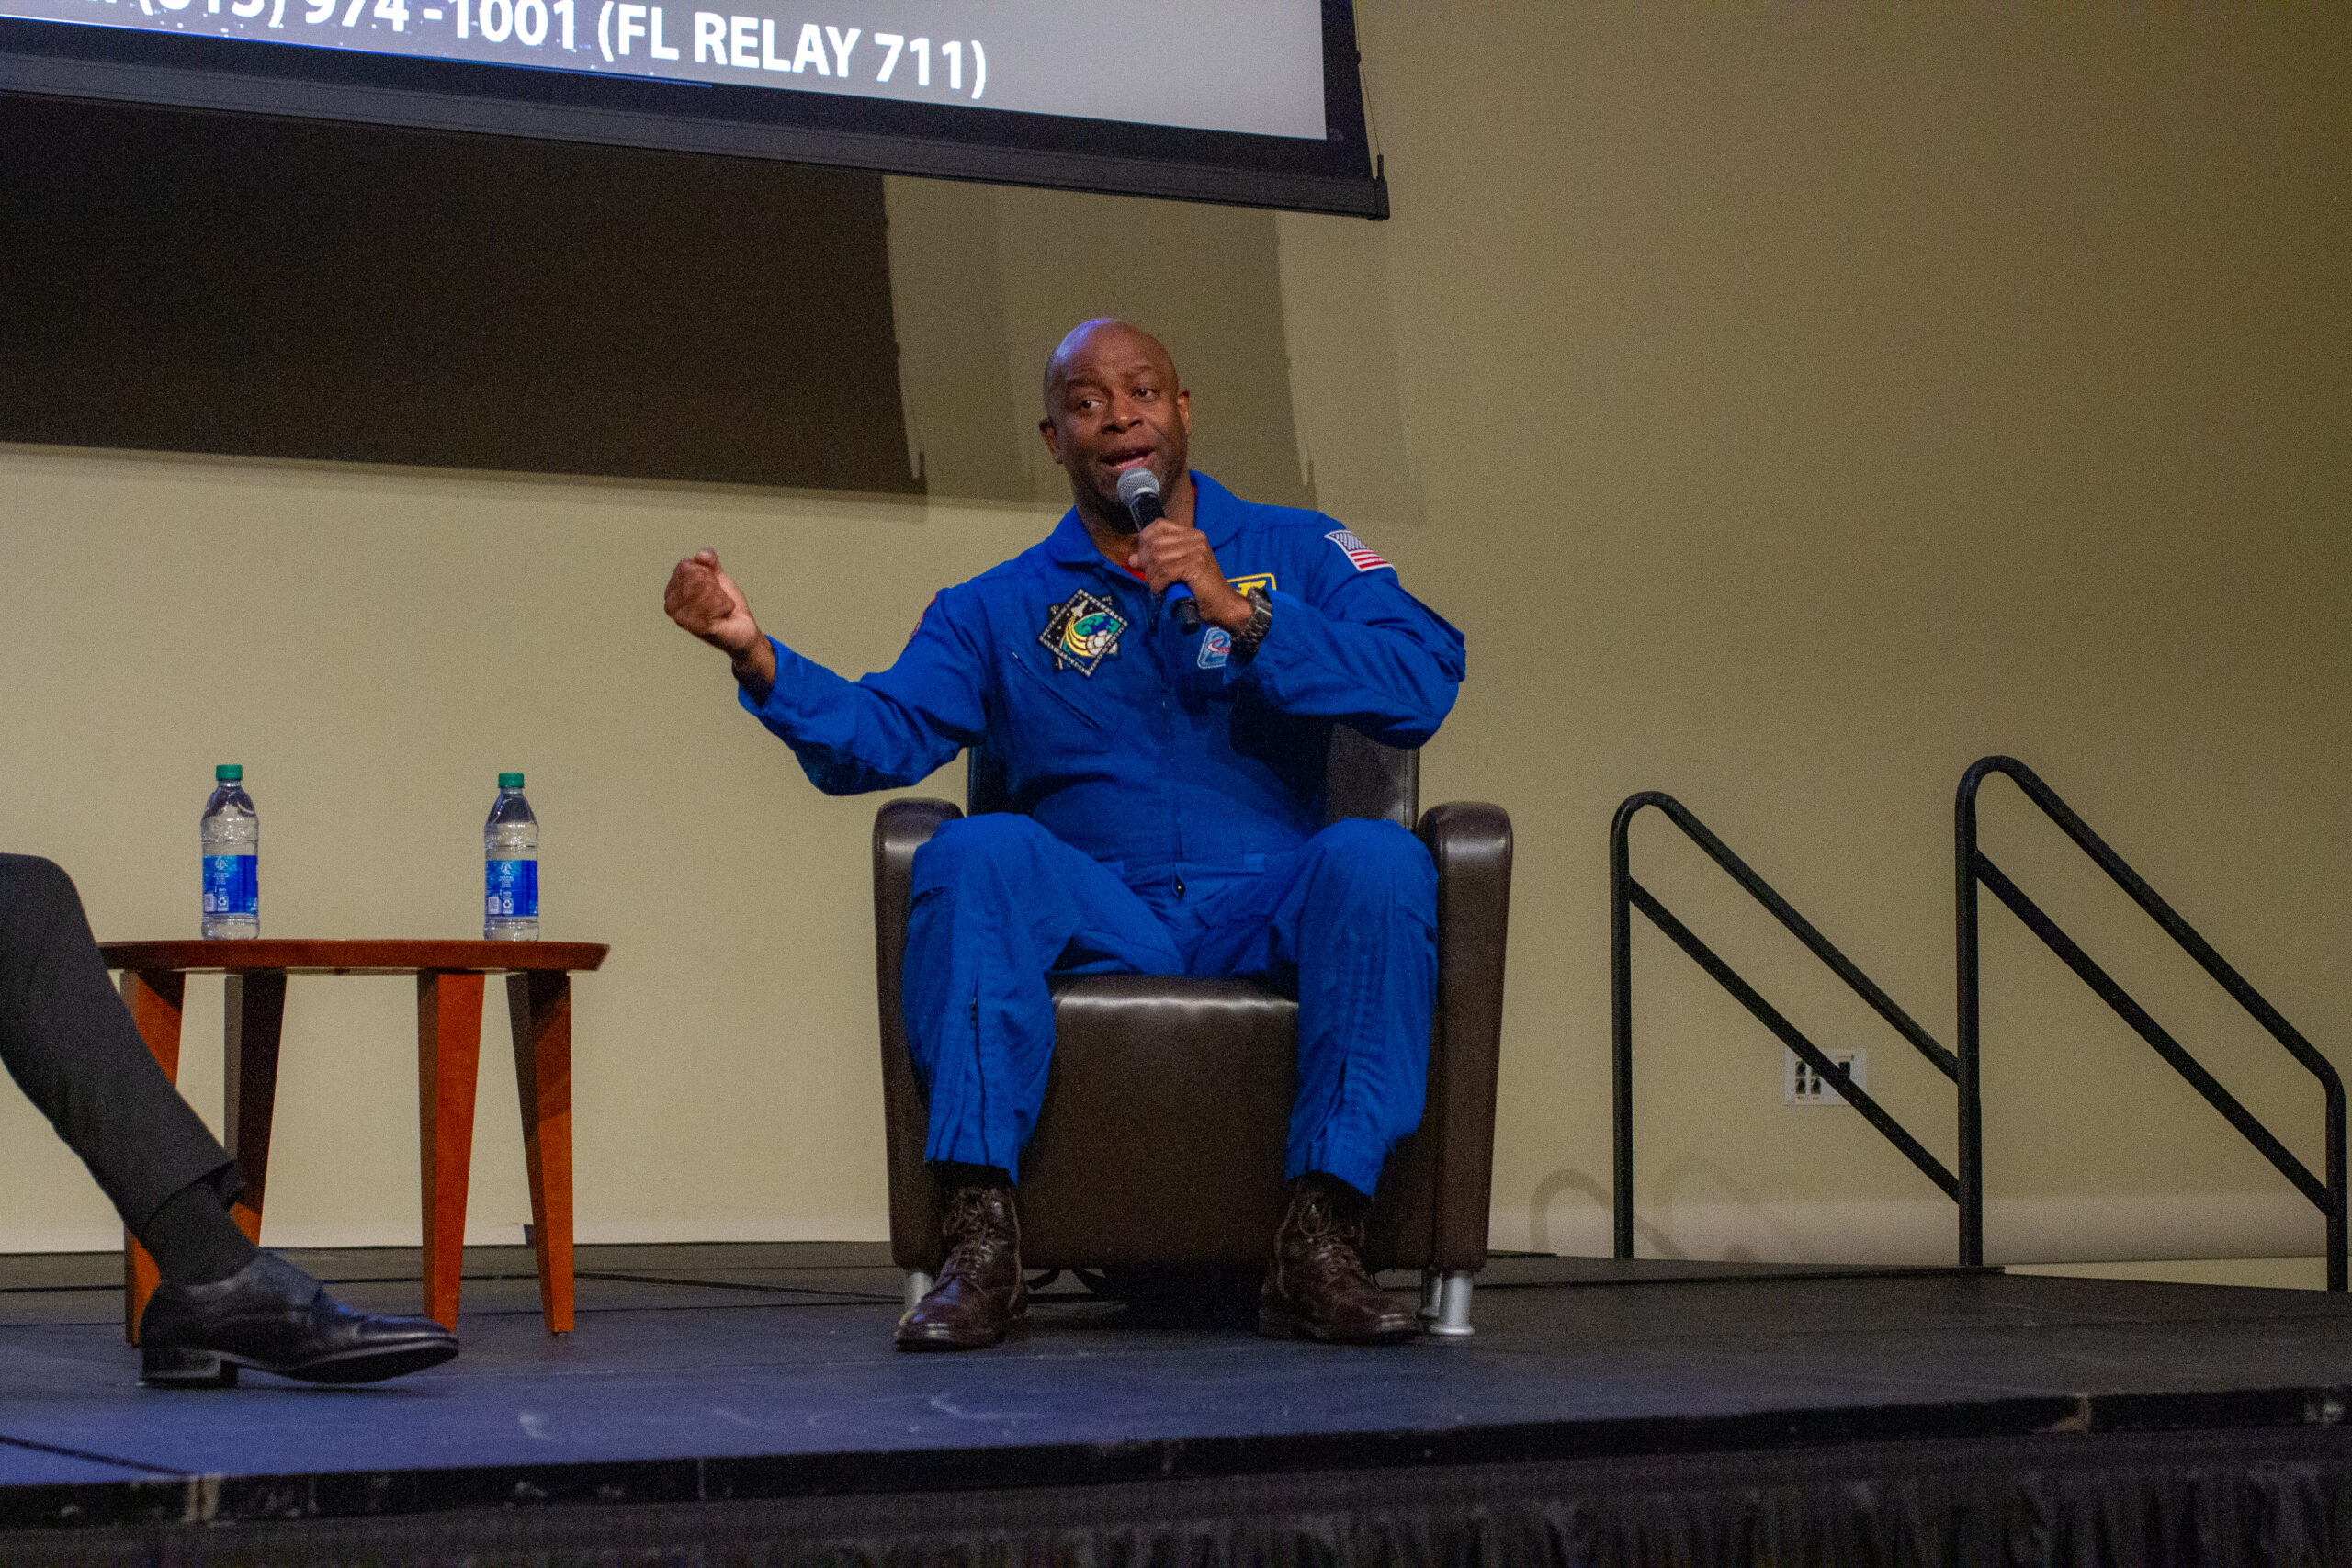 Leland Melvin discusses ambition, diversity during Thursday’s ULS